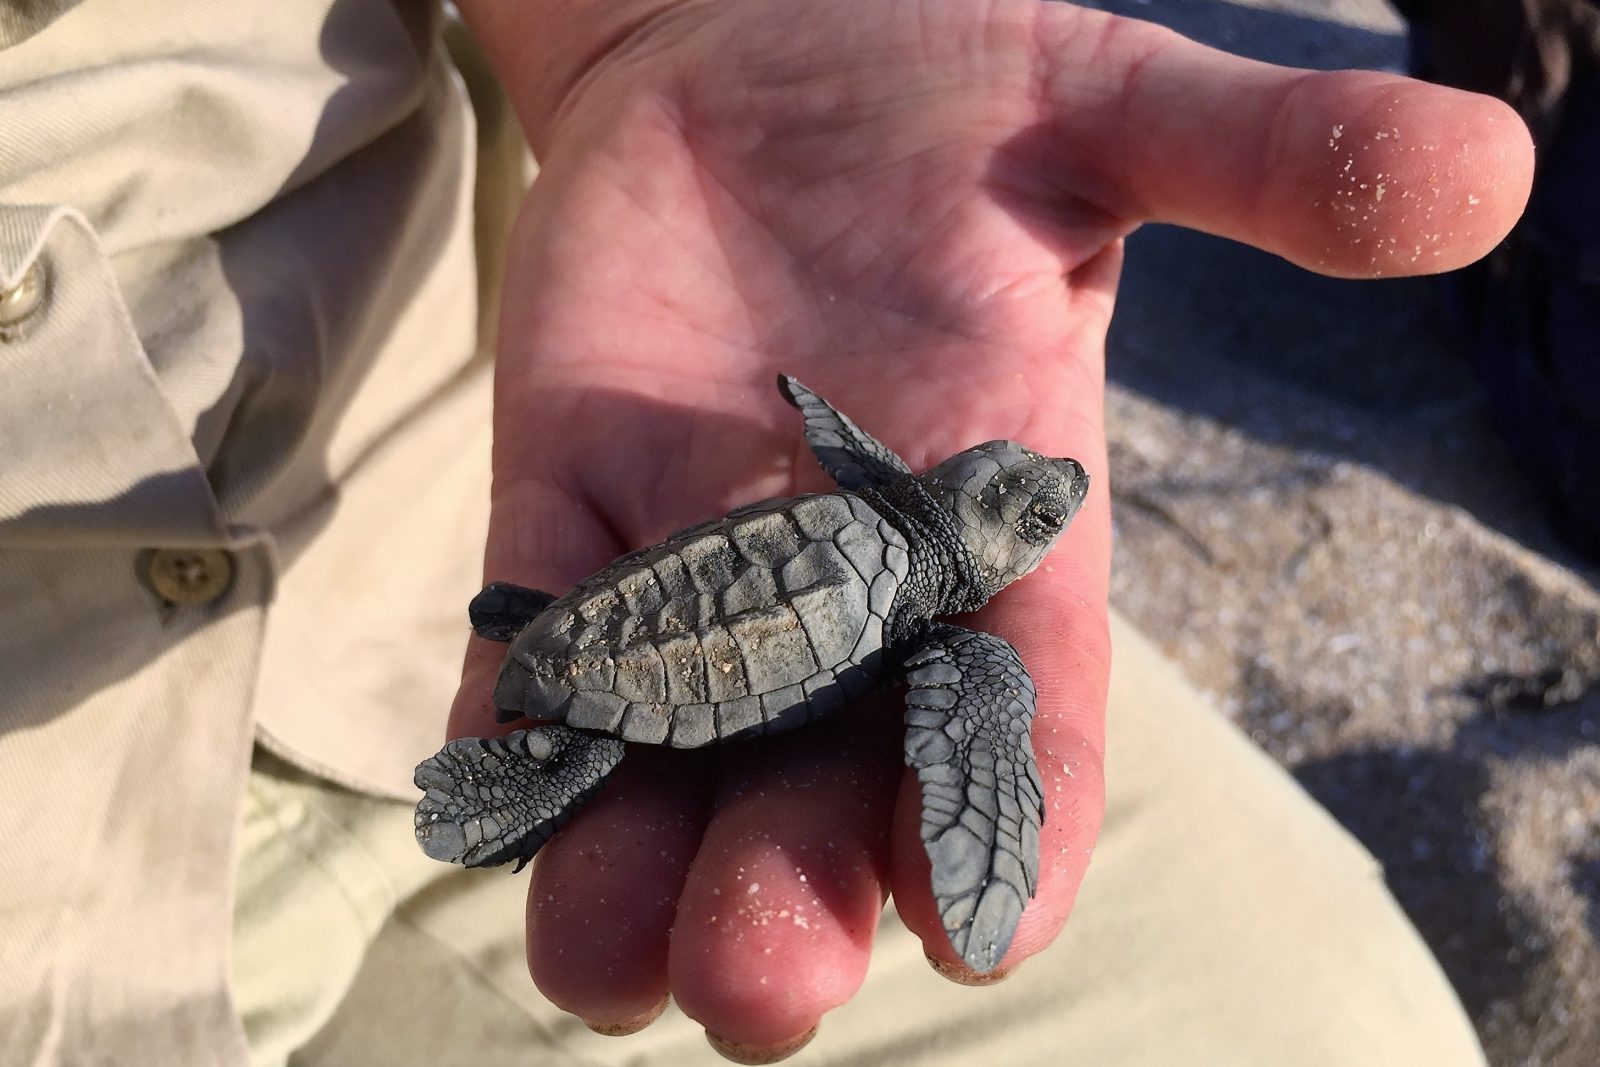 A baby turtle in the palm of a man's hand.